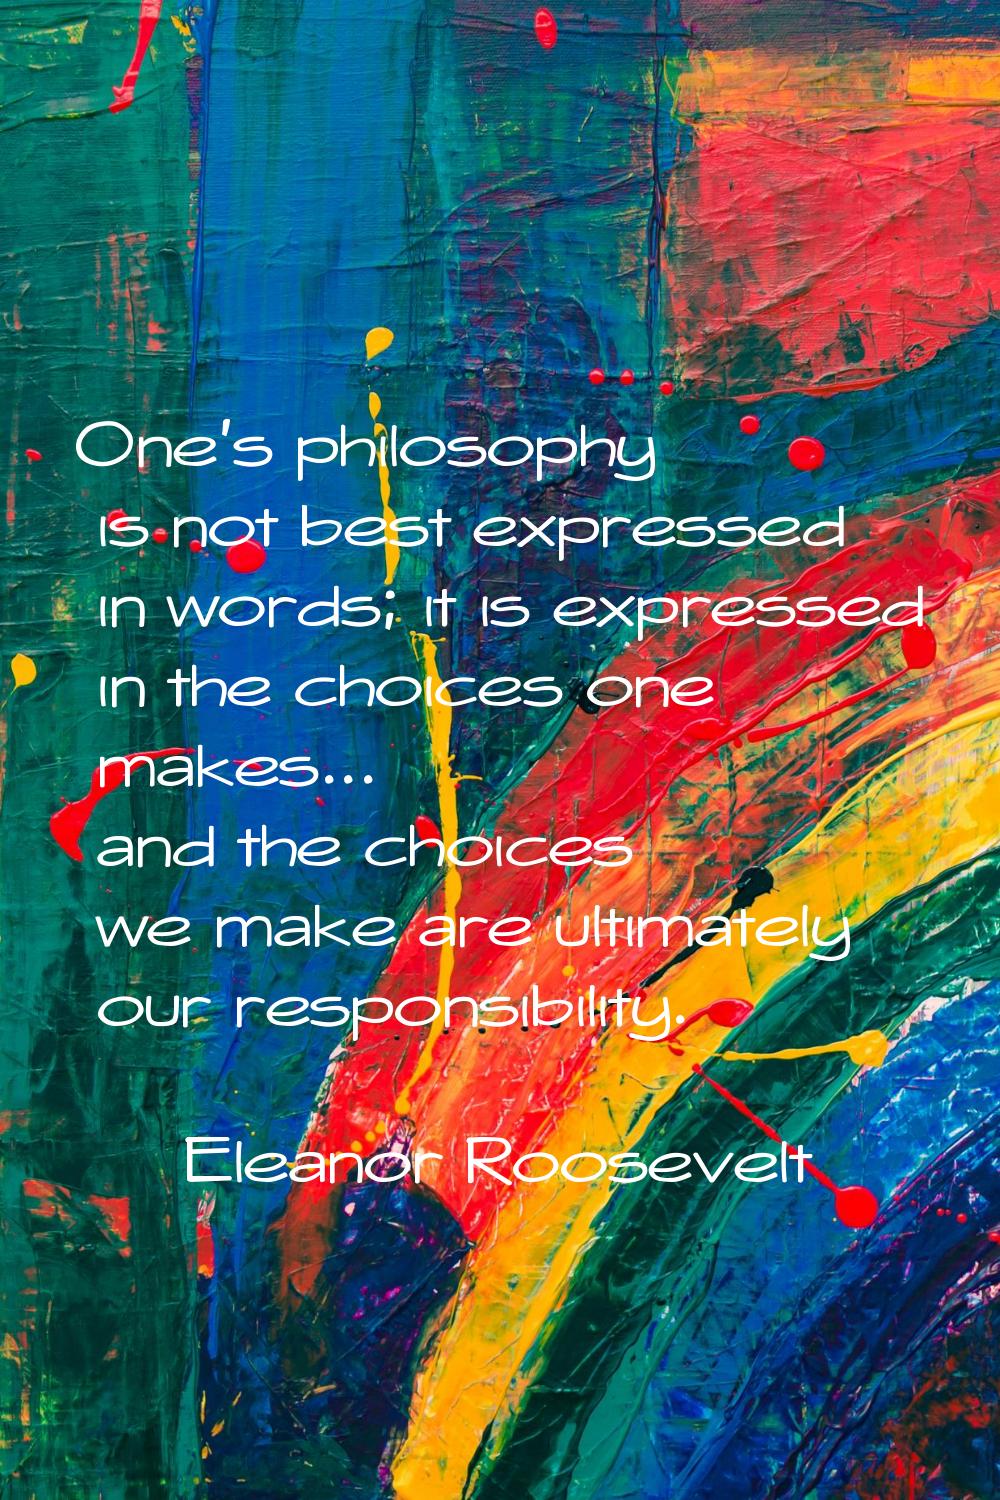 One's philosophy is not best expressed in words; it is expressed in the choices one makes... and th